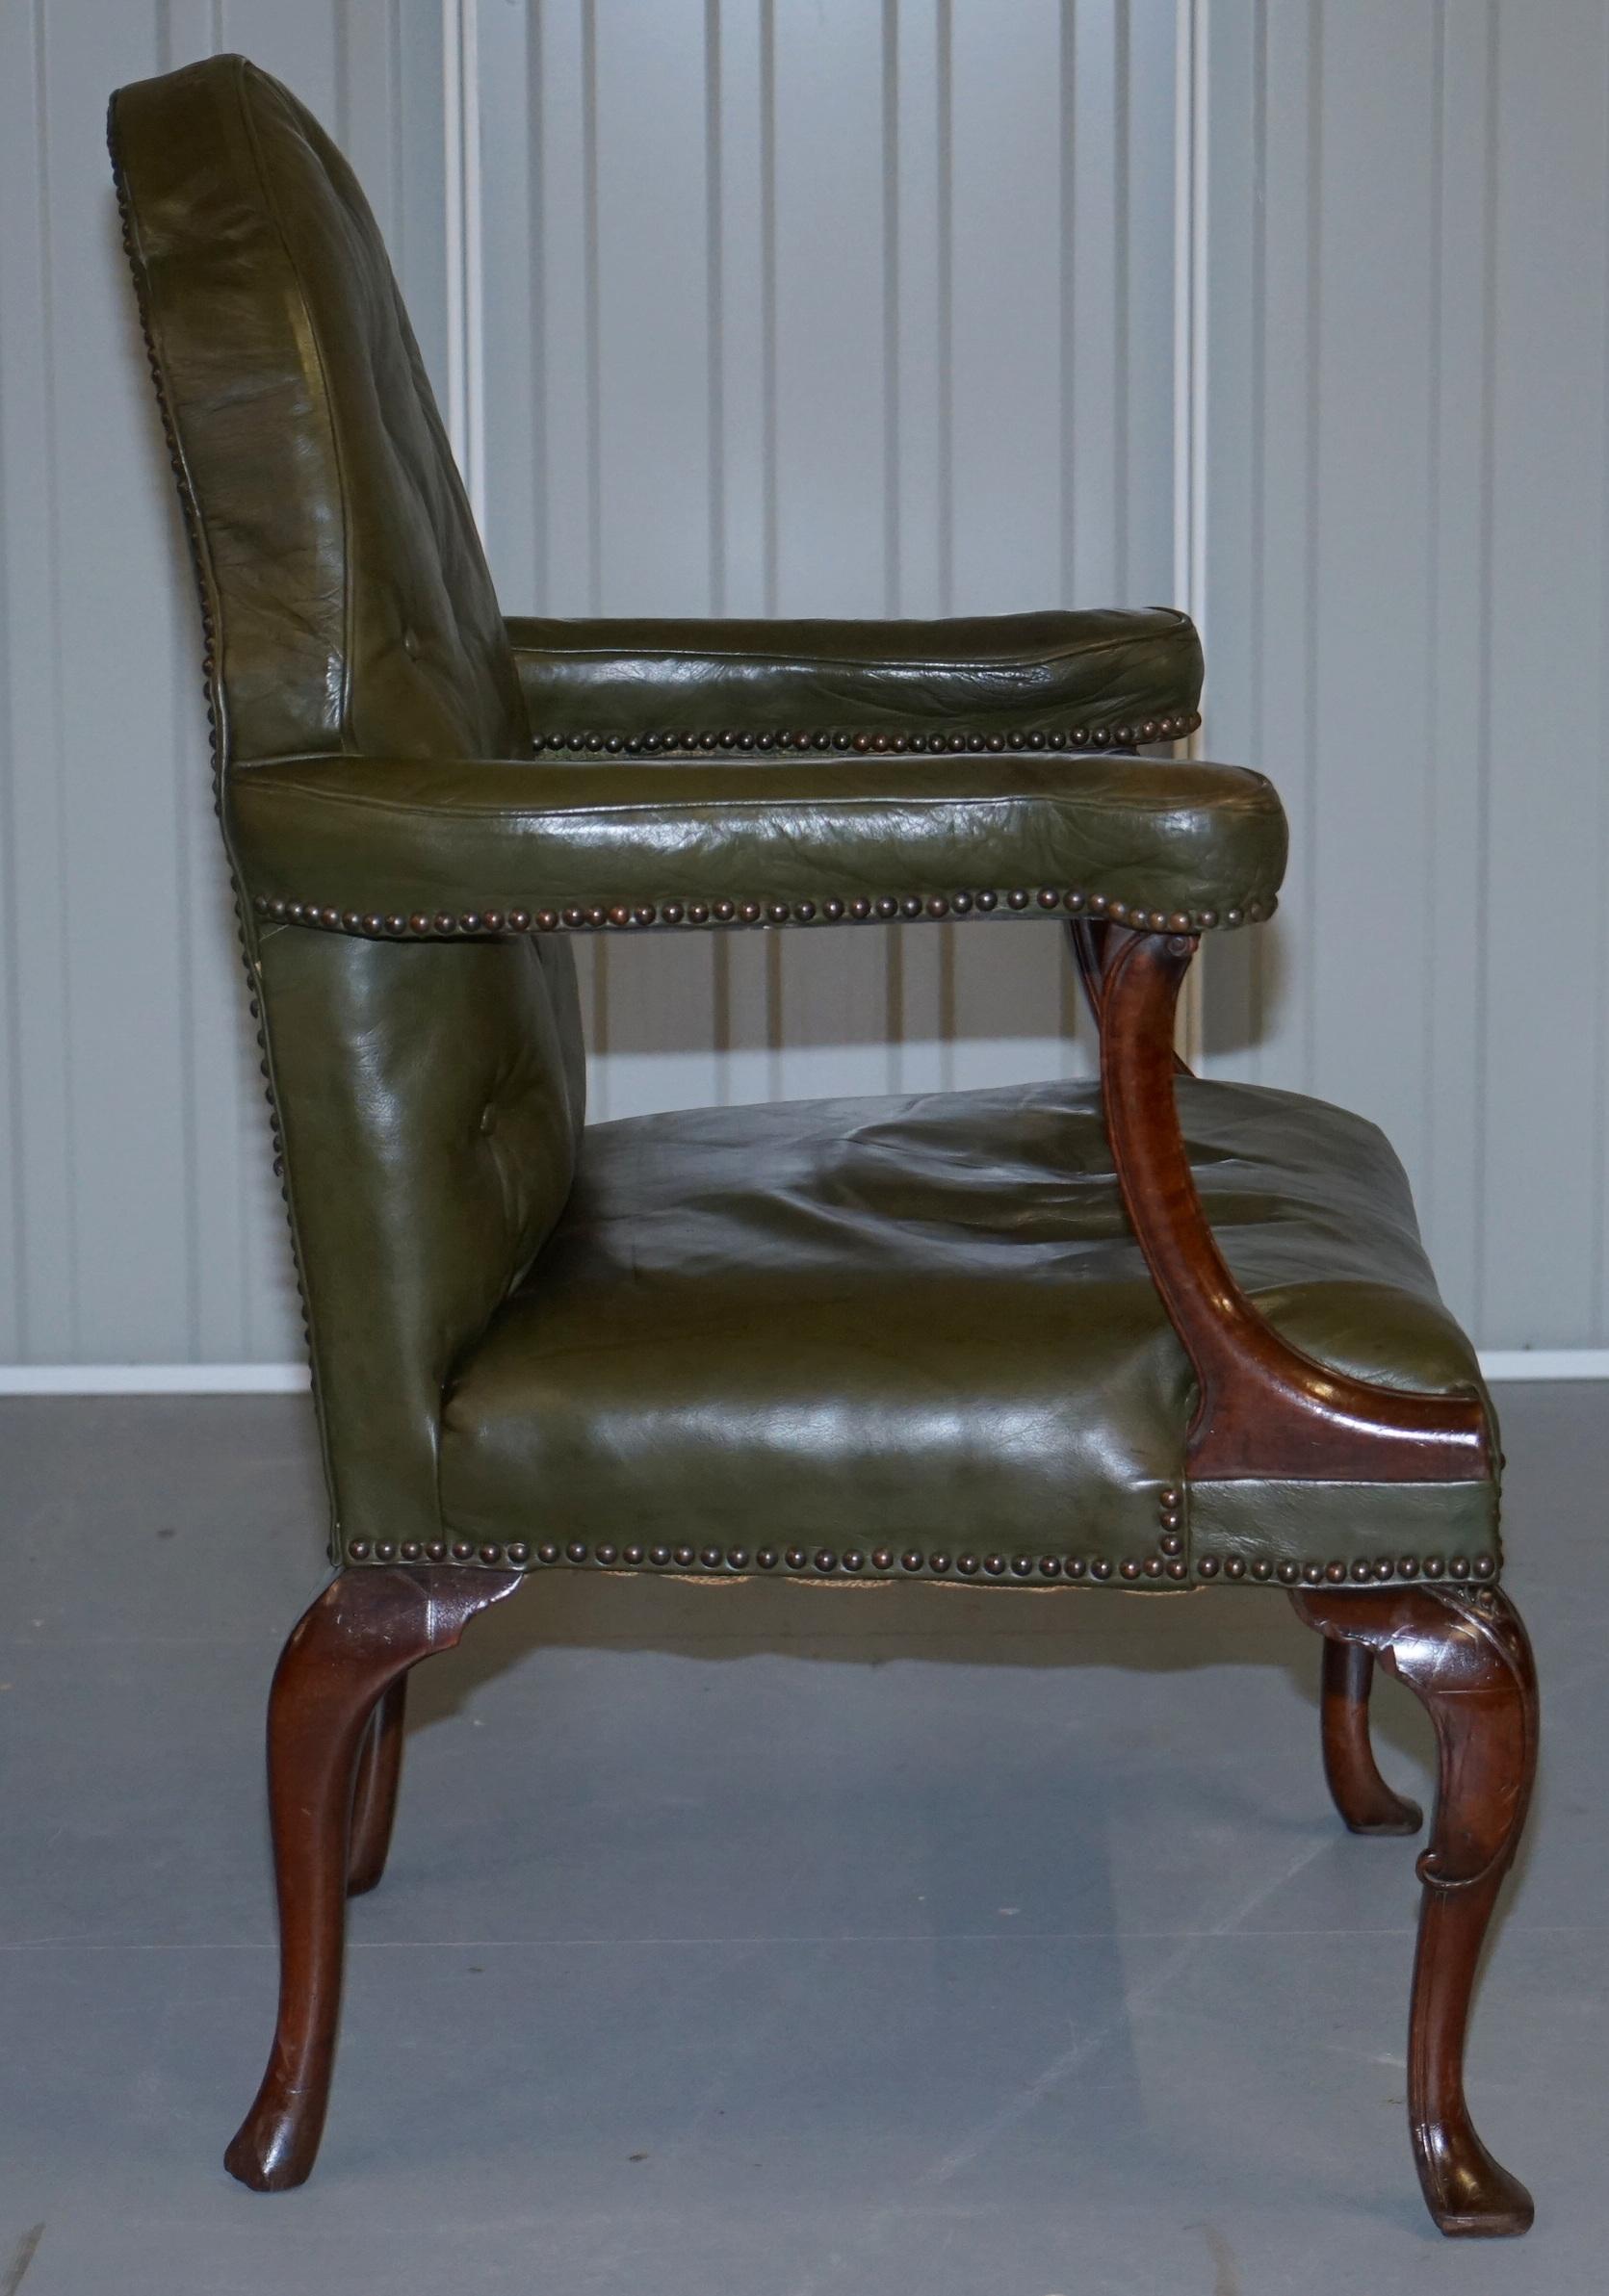 Gothic Revival Georgian Irish Chesterfield Leather Carver Armchair, circa 1800 For Sale 8